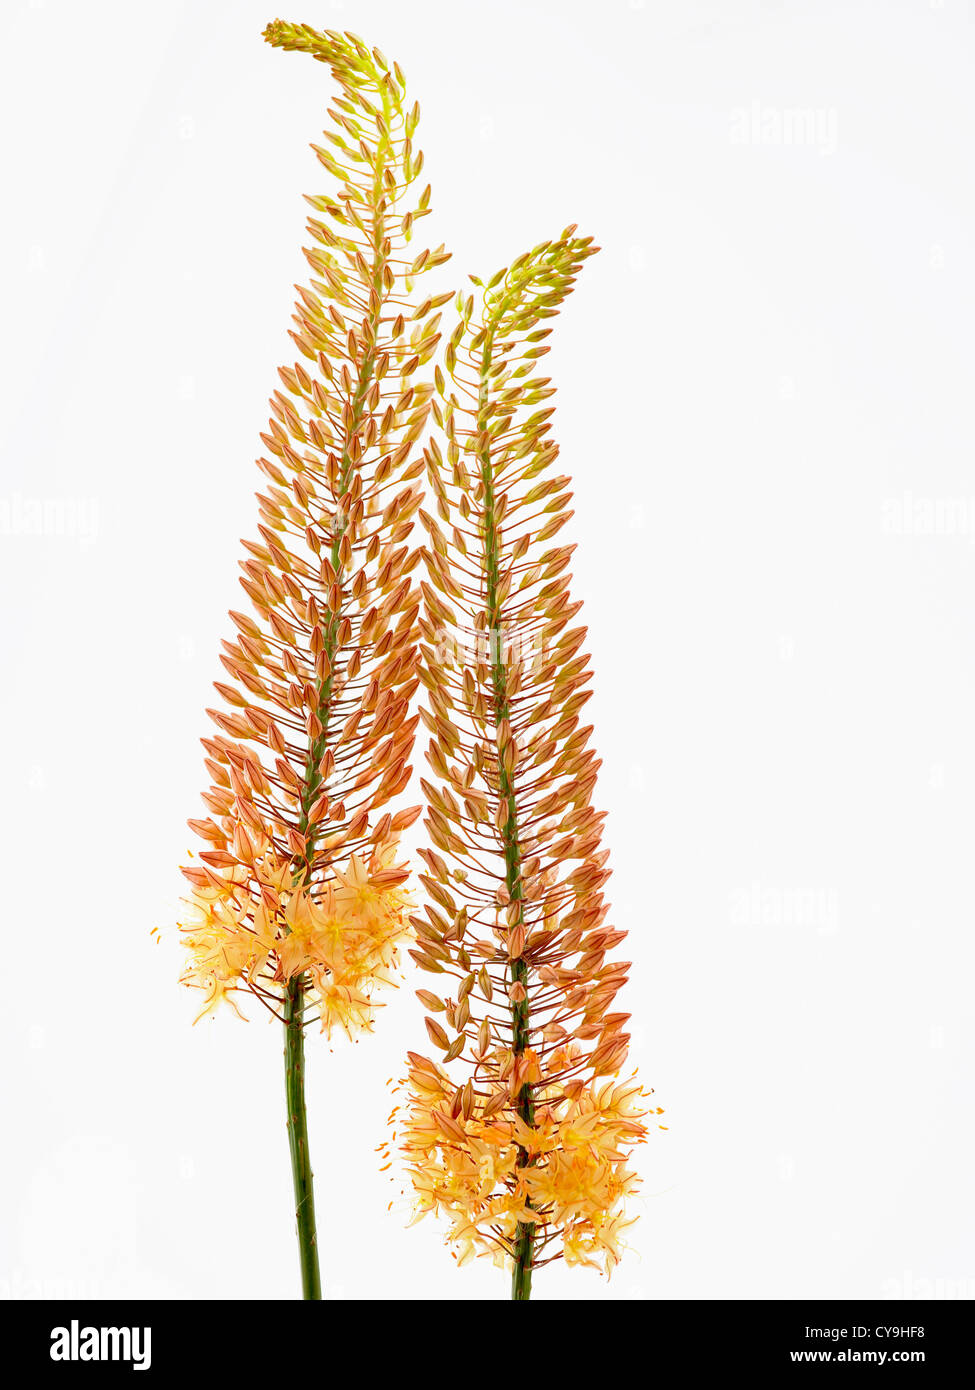 Eremurus stenophyllus, Foxtail lily. Two plume shaped orange coloured flowering stems against a white background Stock Photo